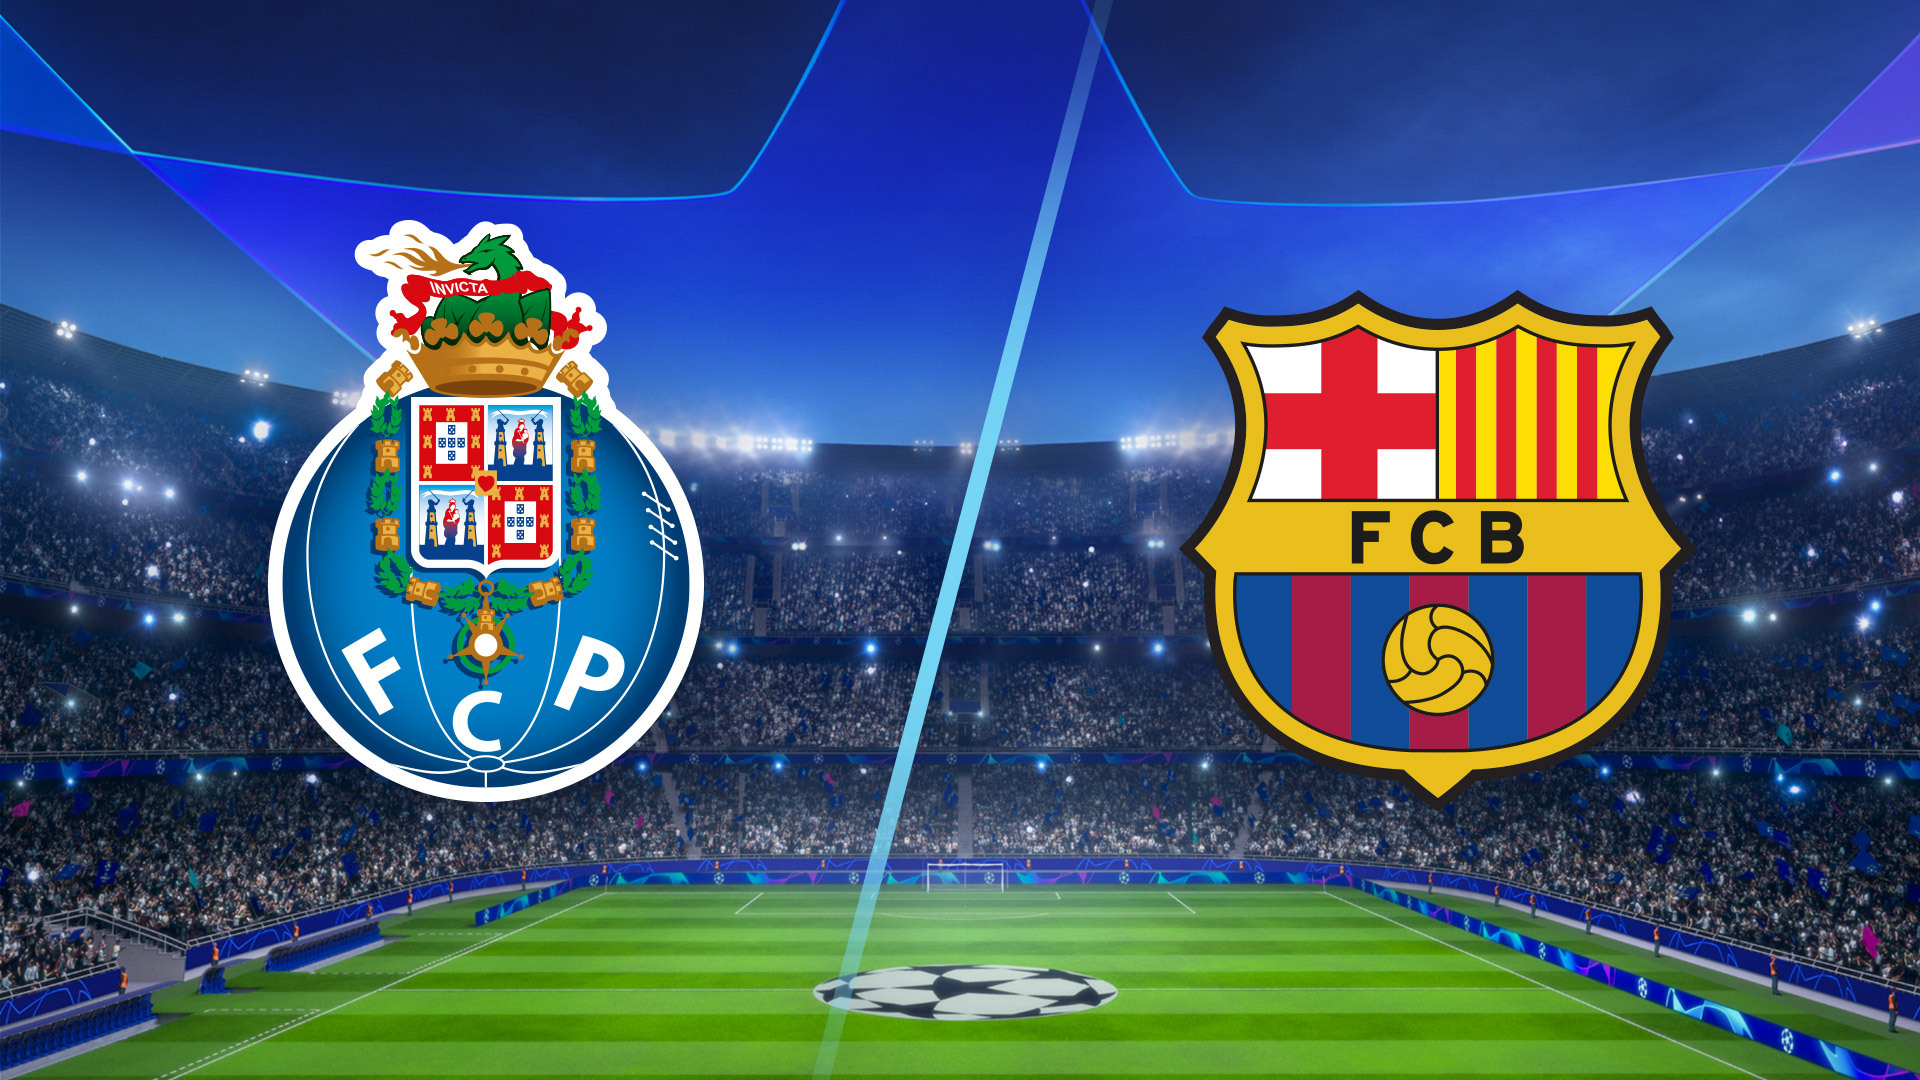 Porto vs FC Barcelona on TV: When and where to watch the Champions